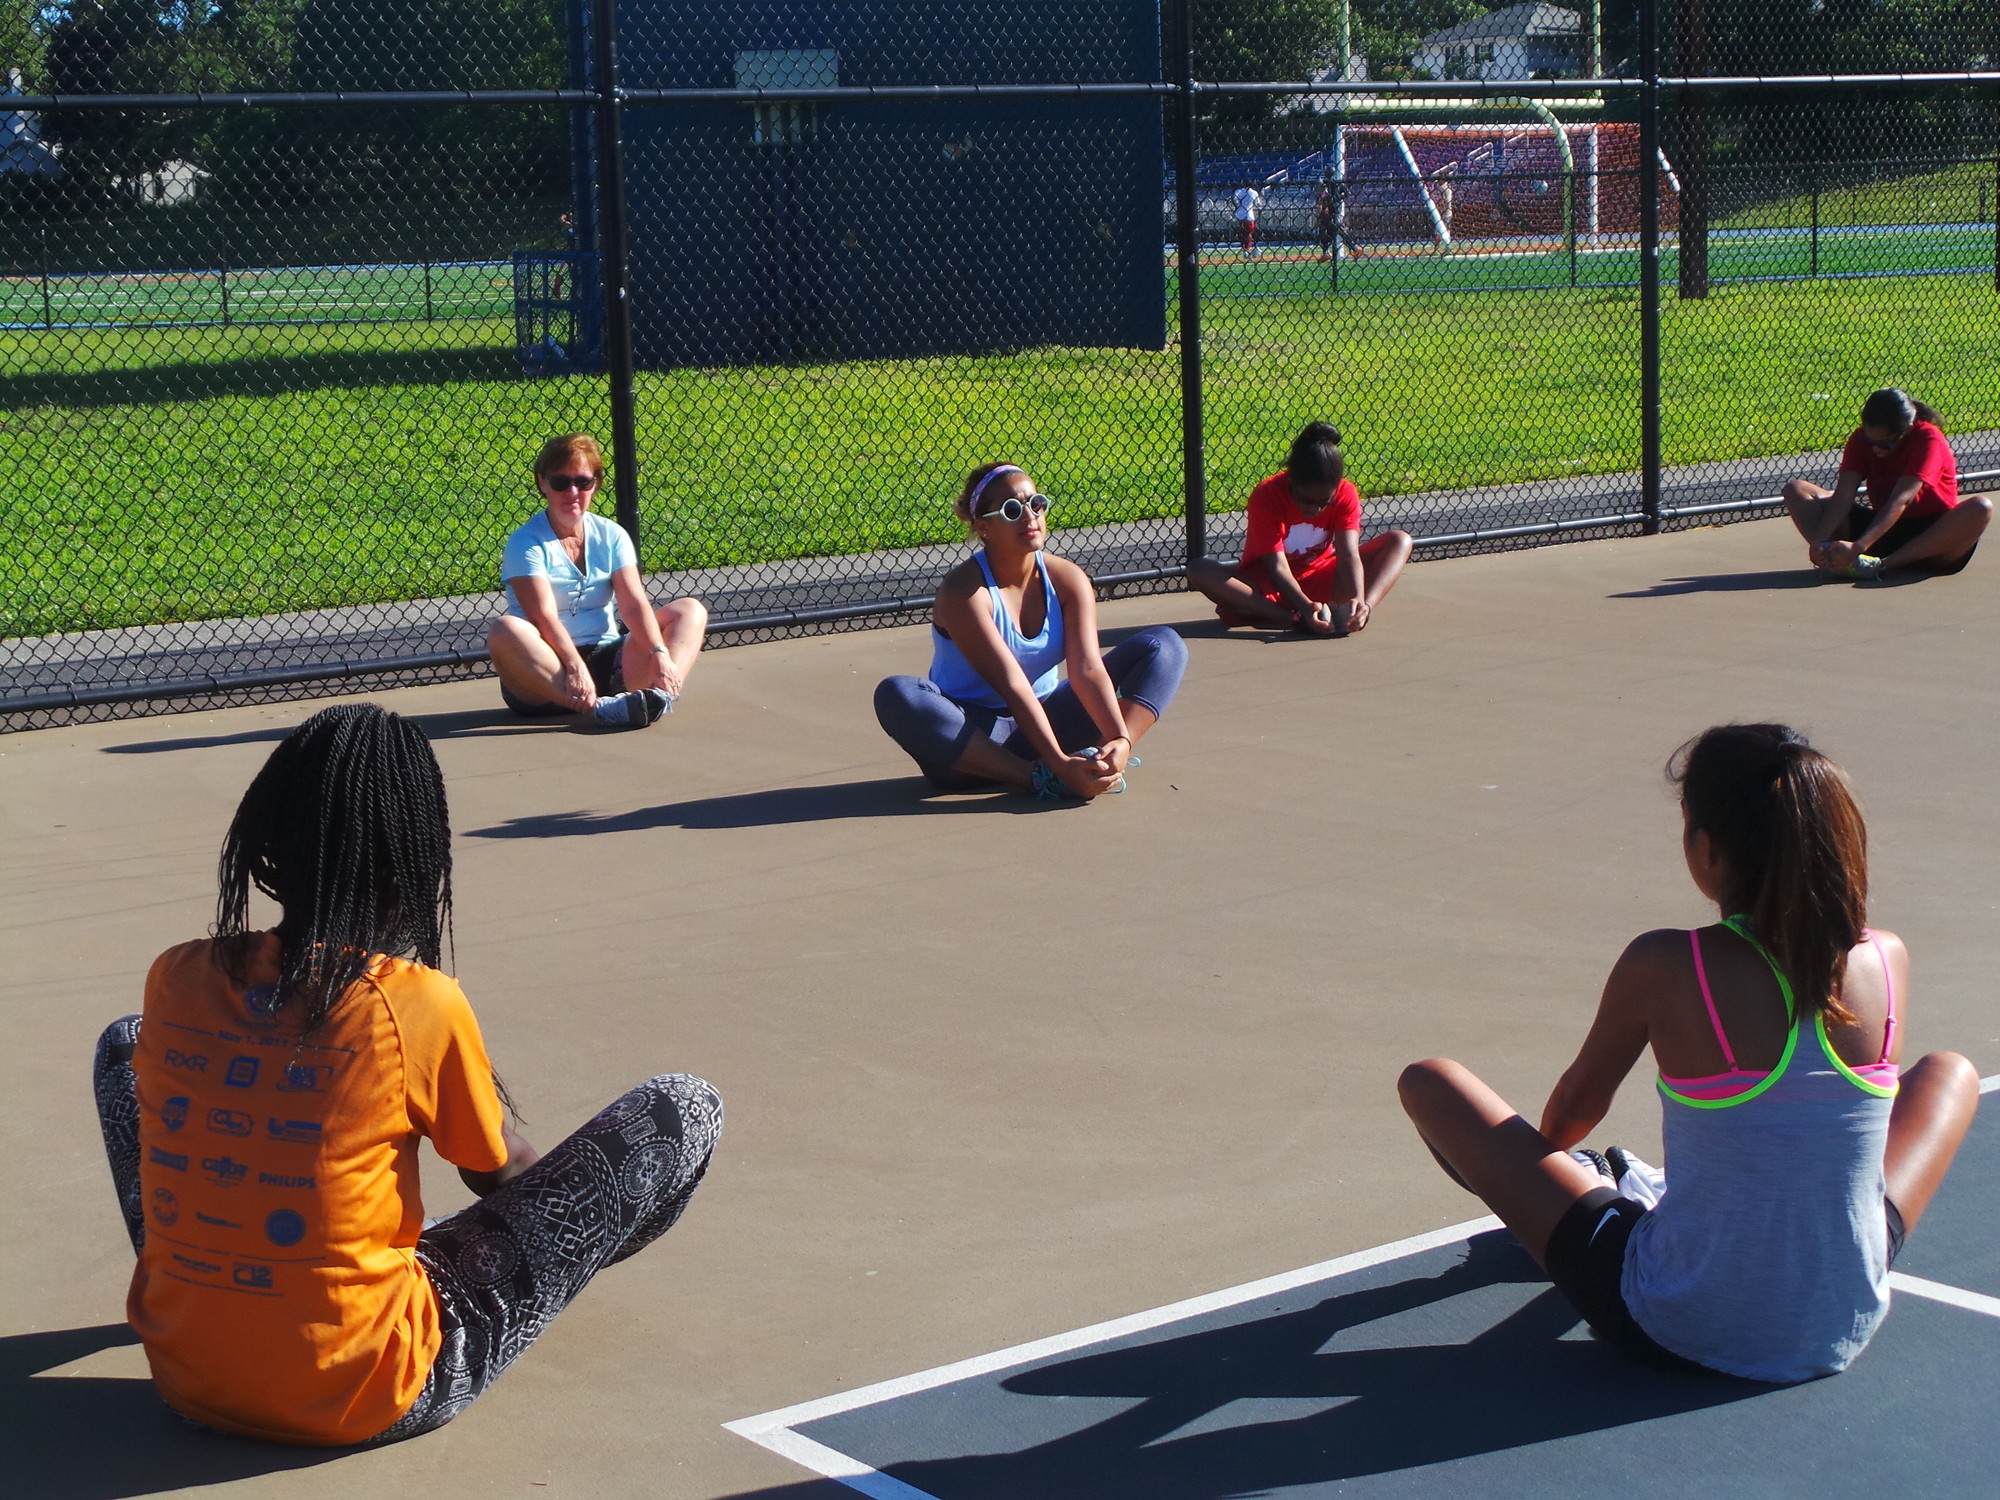 Malverne High School tennis team captain Sarah Afzali, center, led her team in warmup drills prior to a practice on the high school courts last week.